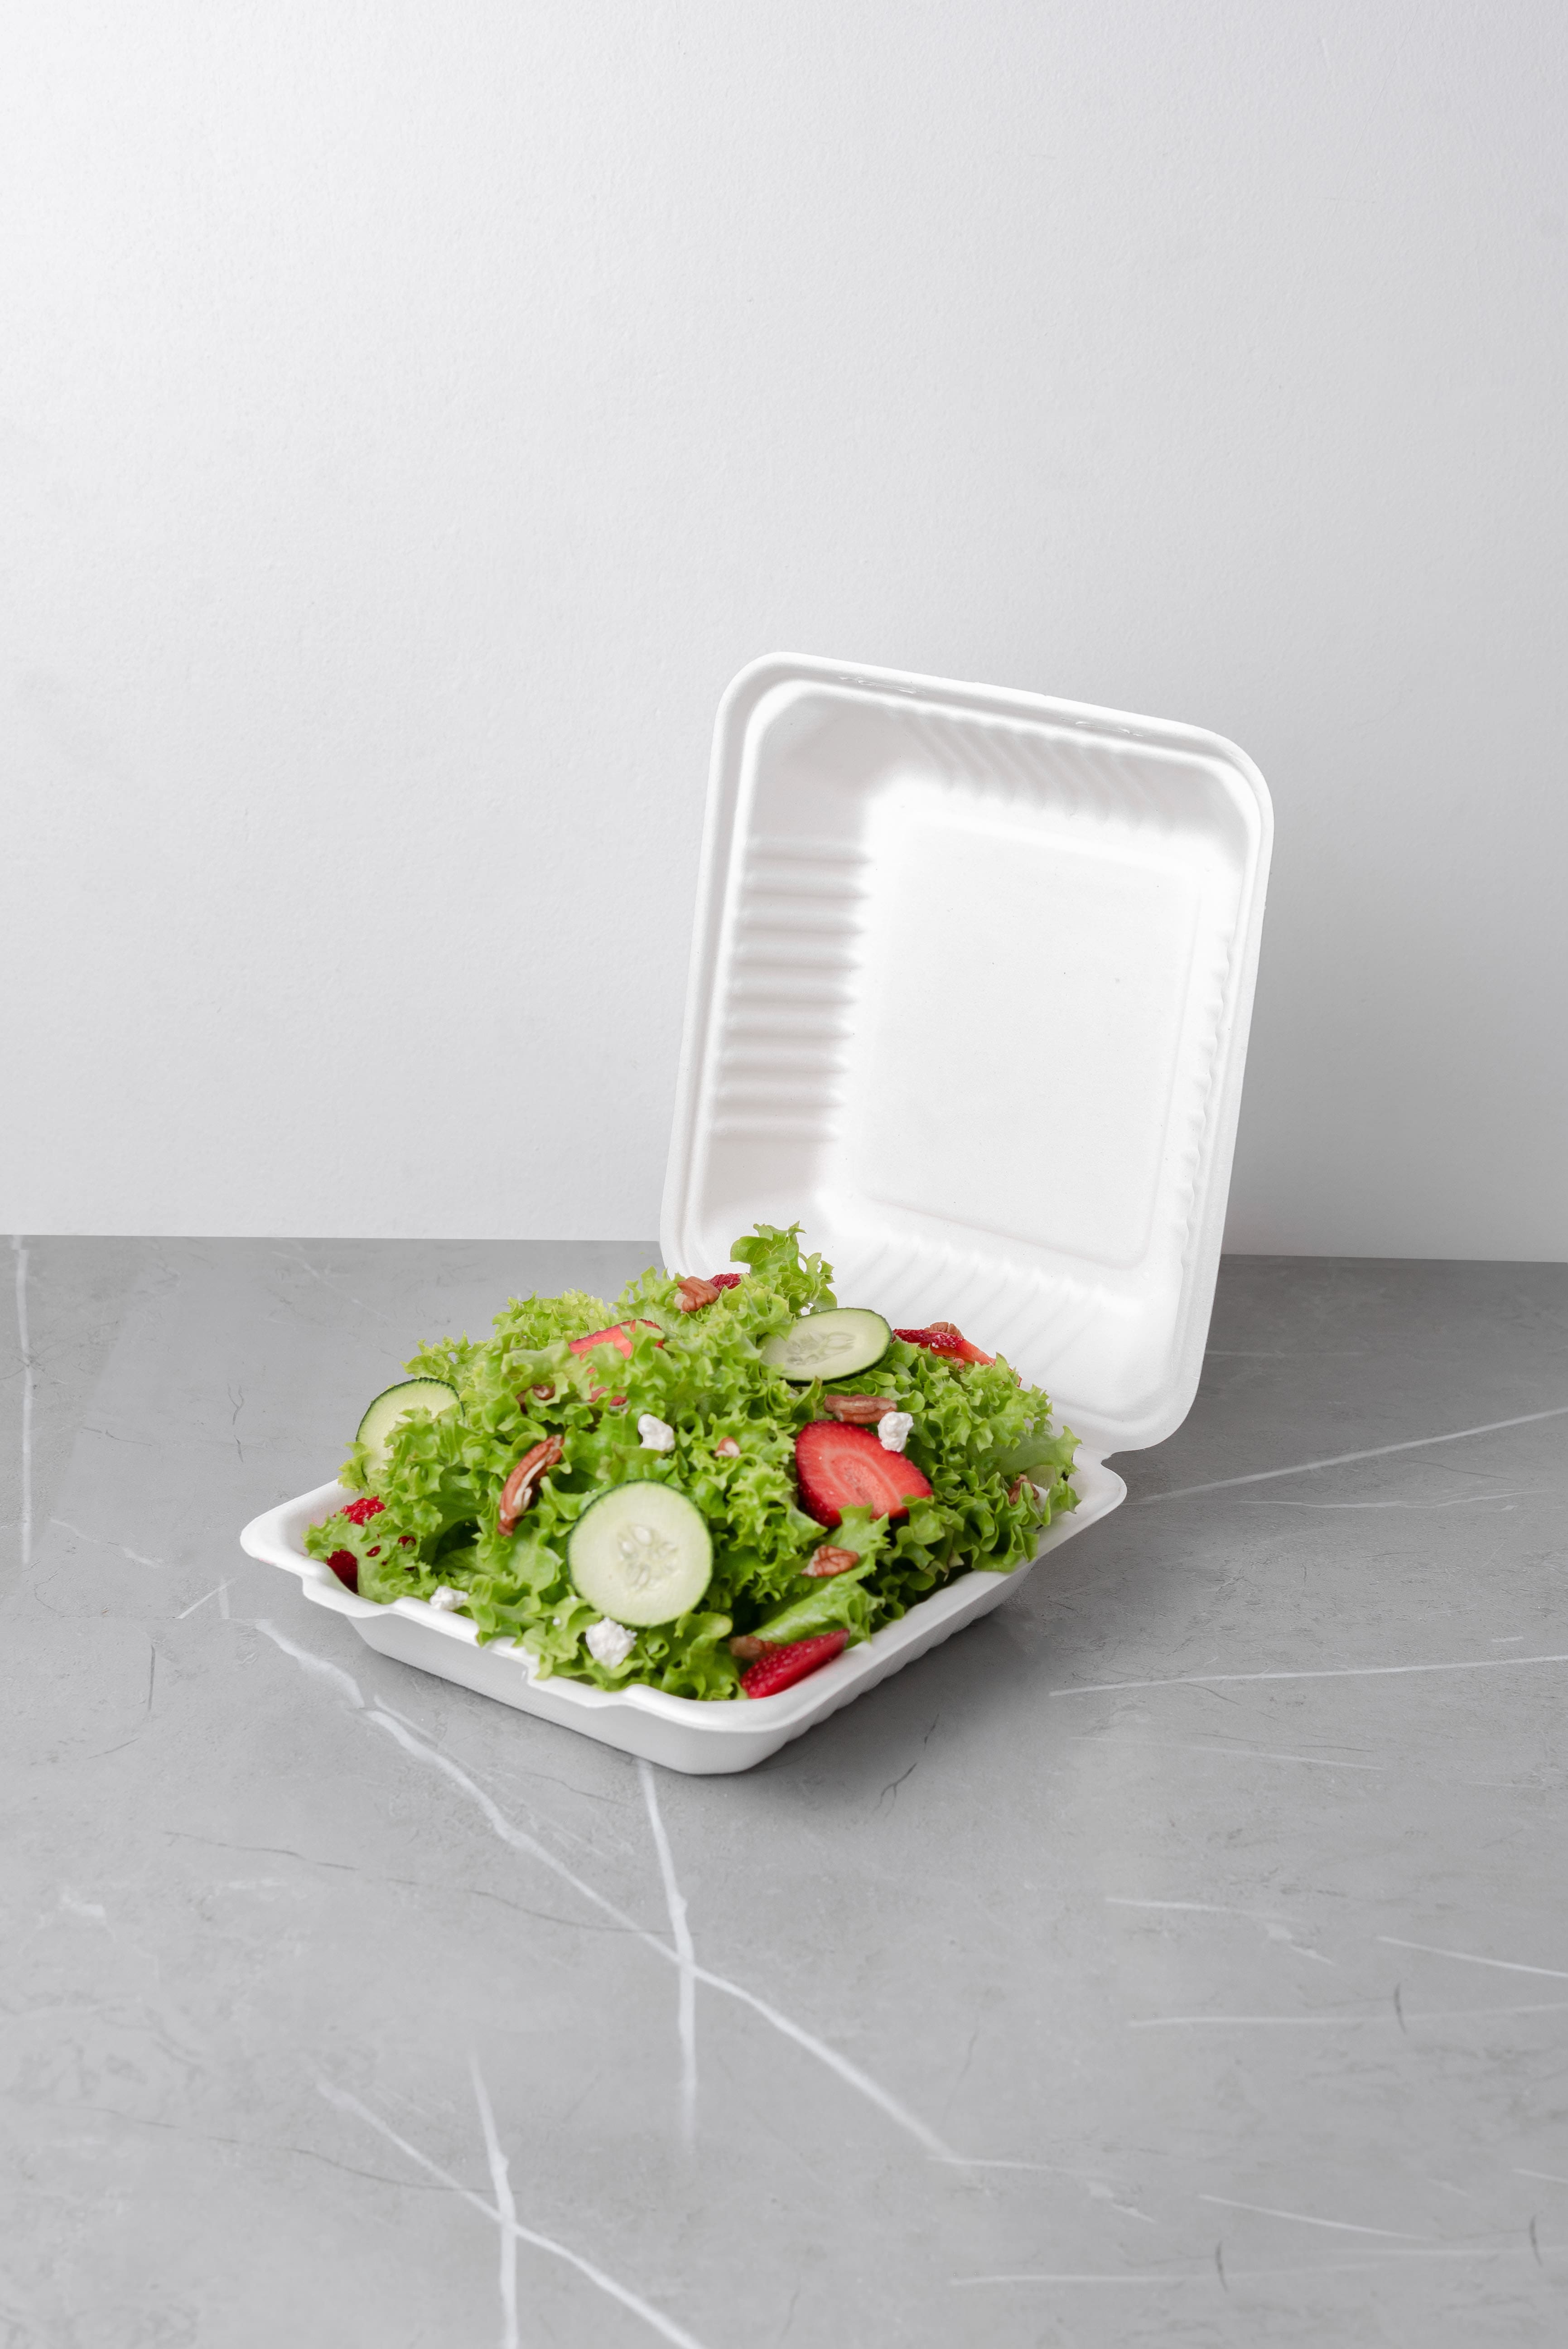 Tree-Free™ Compostable 9 x 9 x 3 Hinged Clamshell Containers - 200/Ctn